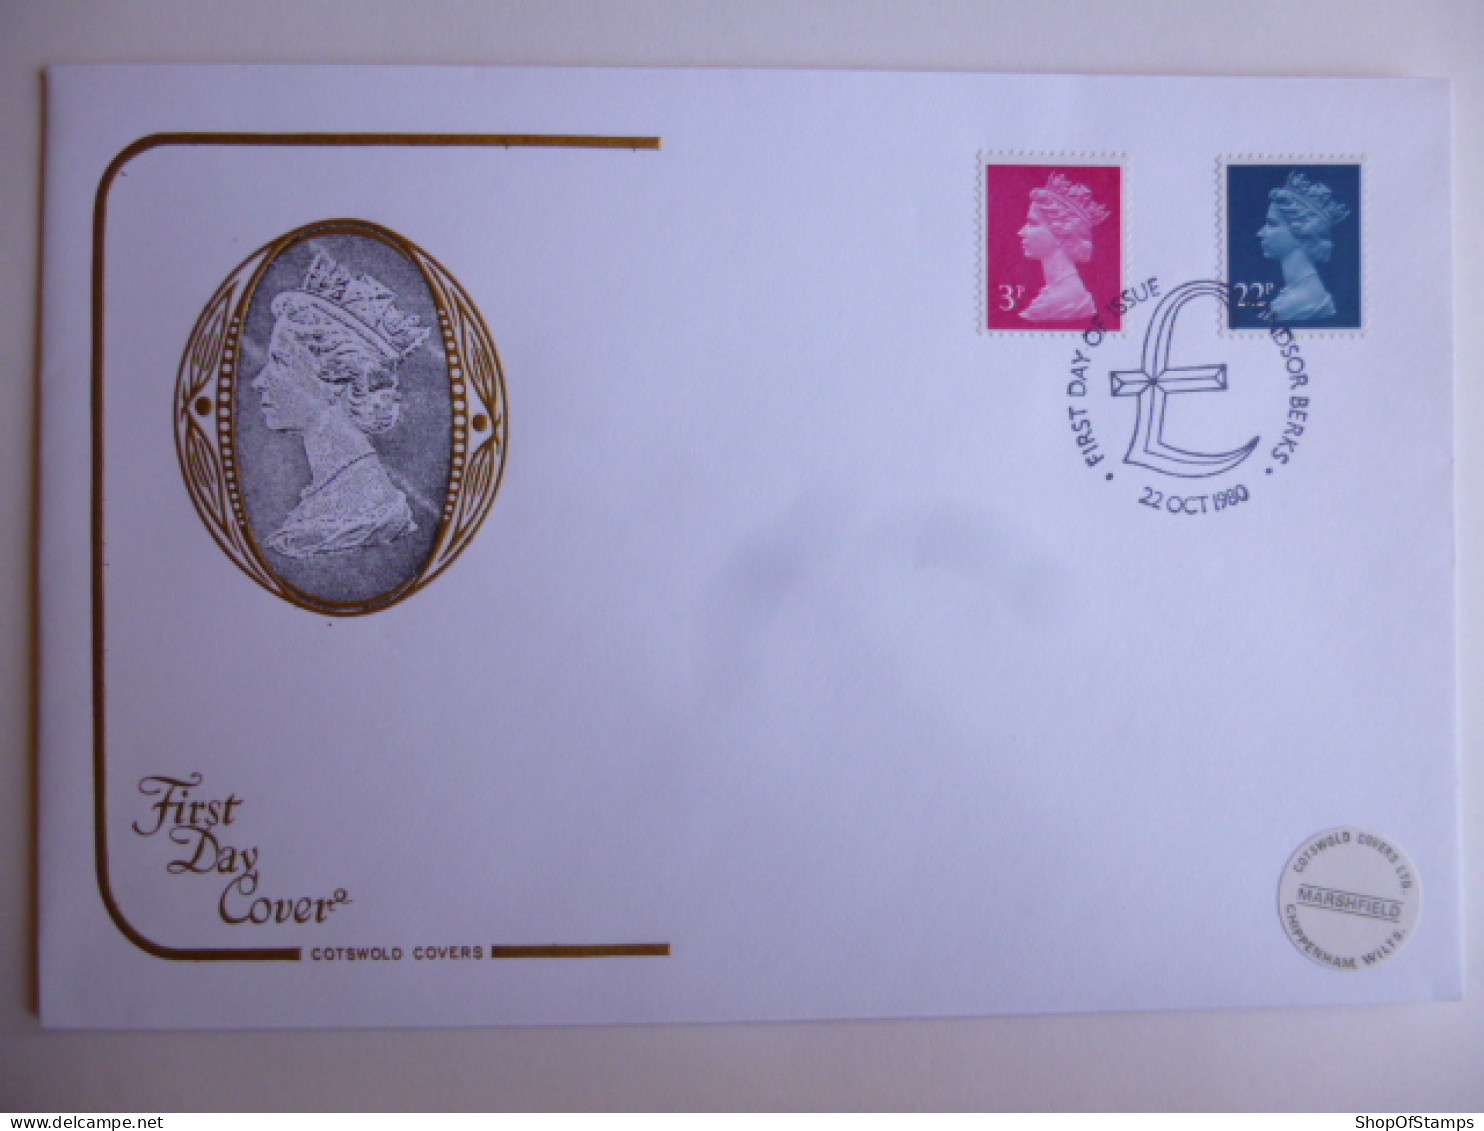 GREAT BRITAIN SG DEFINITIVES ISSUE DATED  22.10.80 FDC  - Unclassified